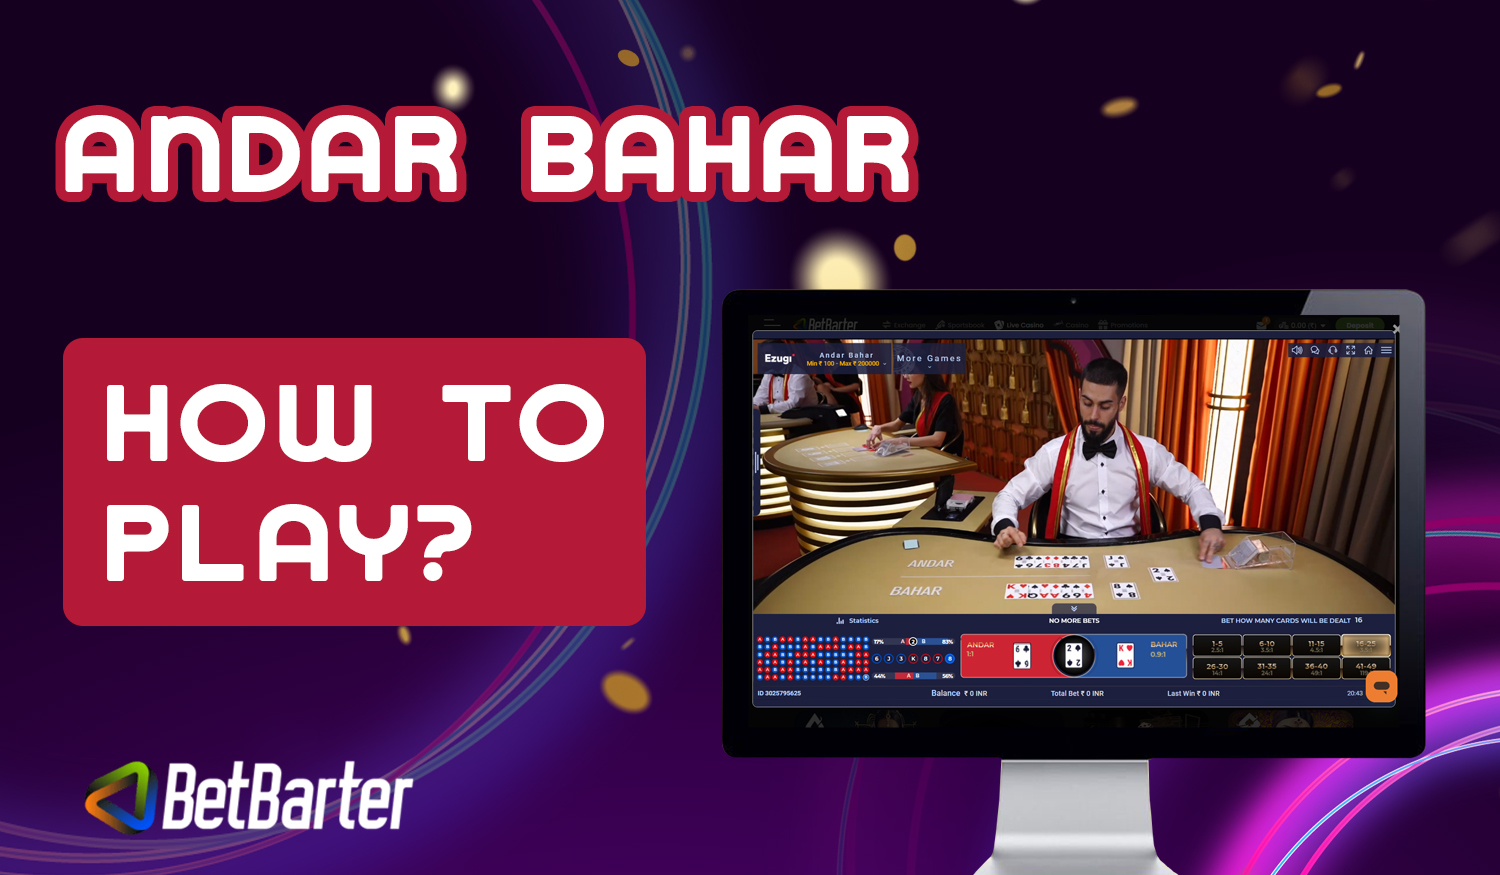 Step-by-step instructions on how to start playing Andar Bahar on BetBarter website